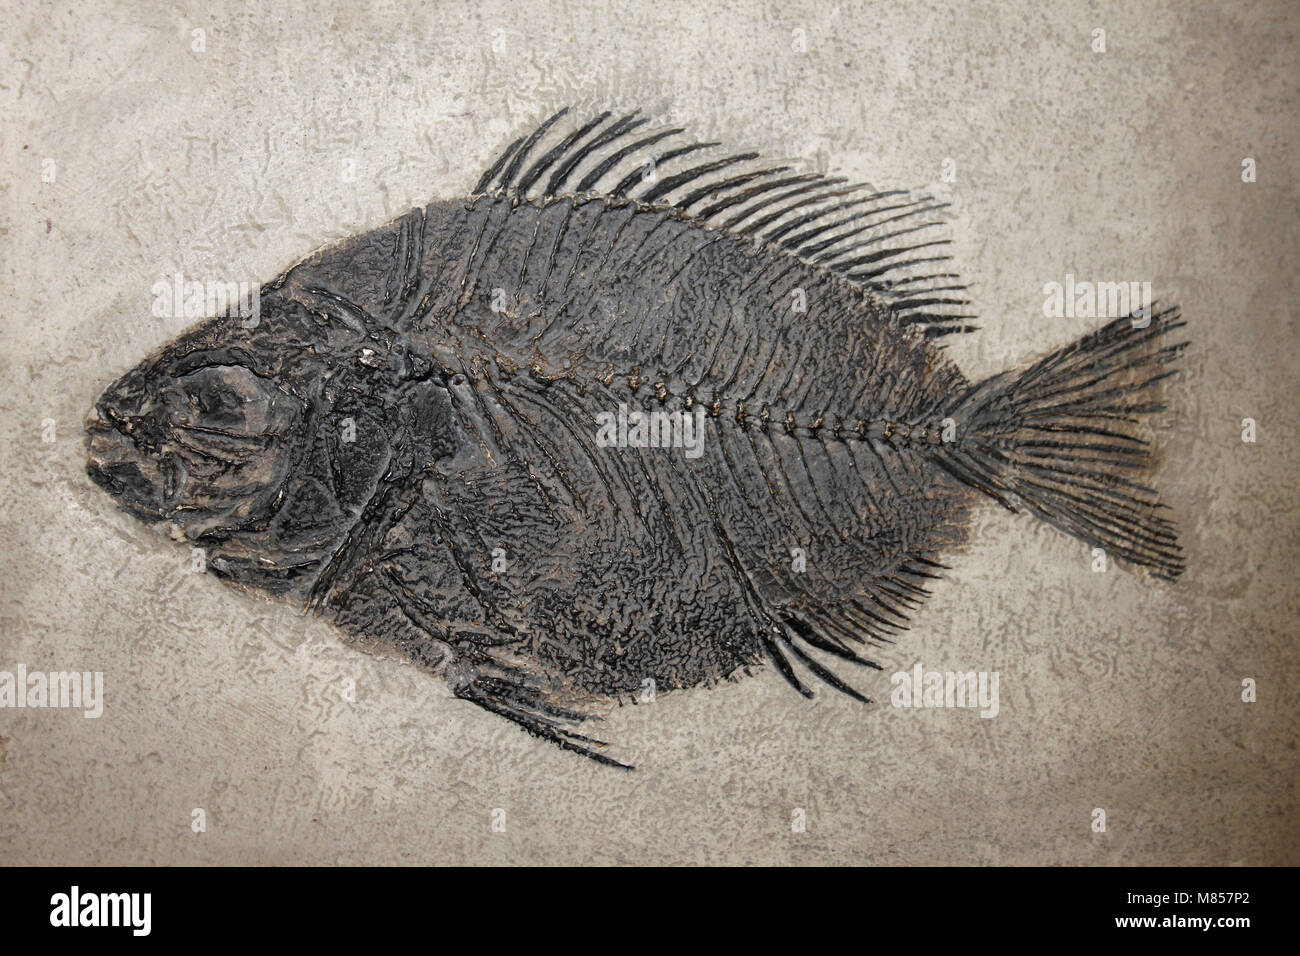 Fossil Fish Priscacara peali -  Green River Formation, Wyoming, USA Stock Photo